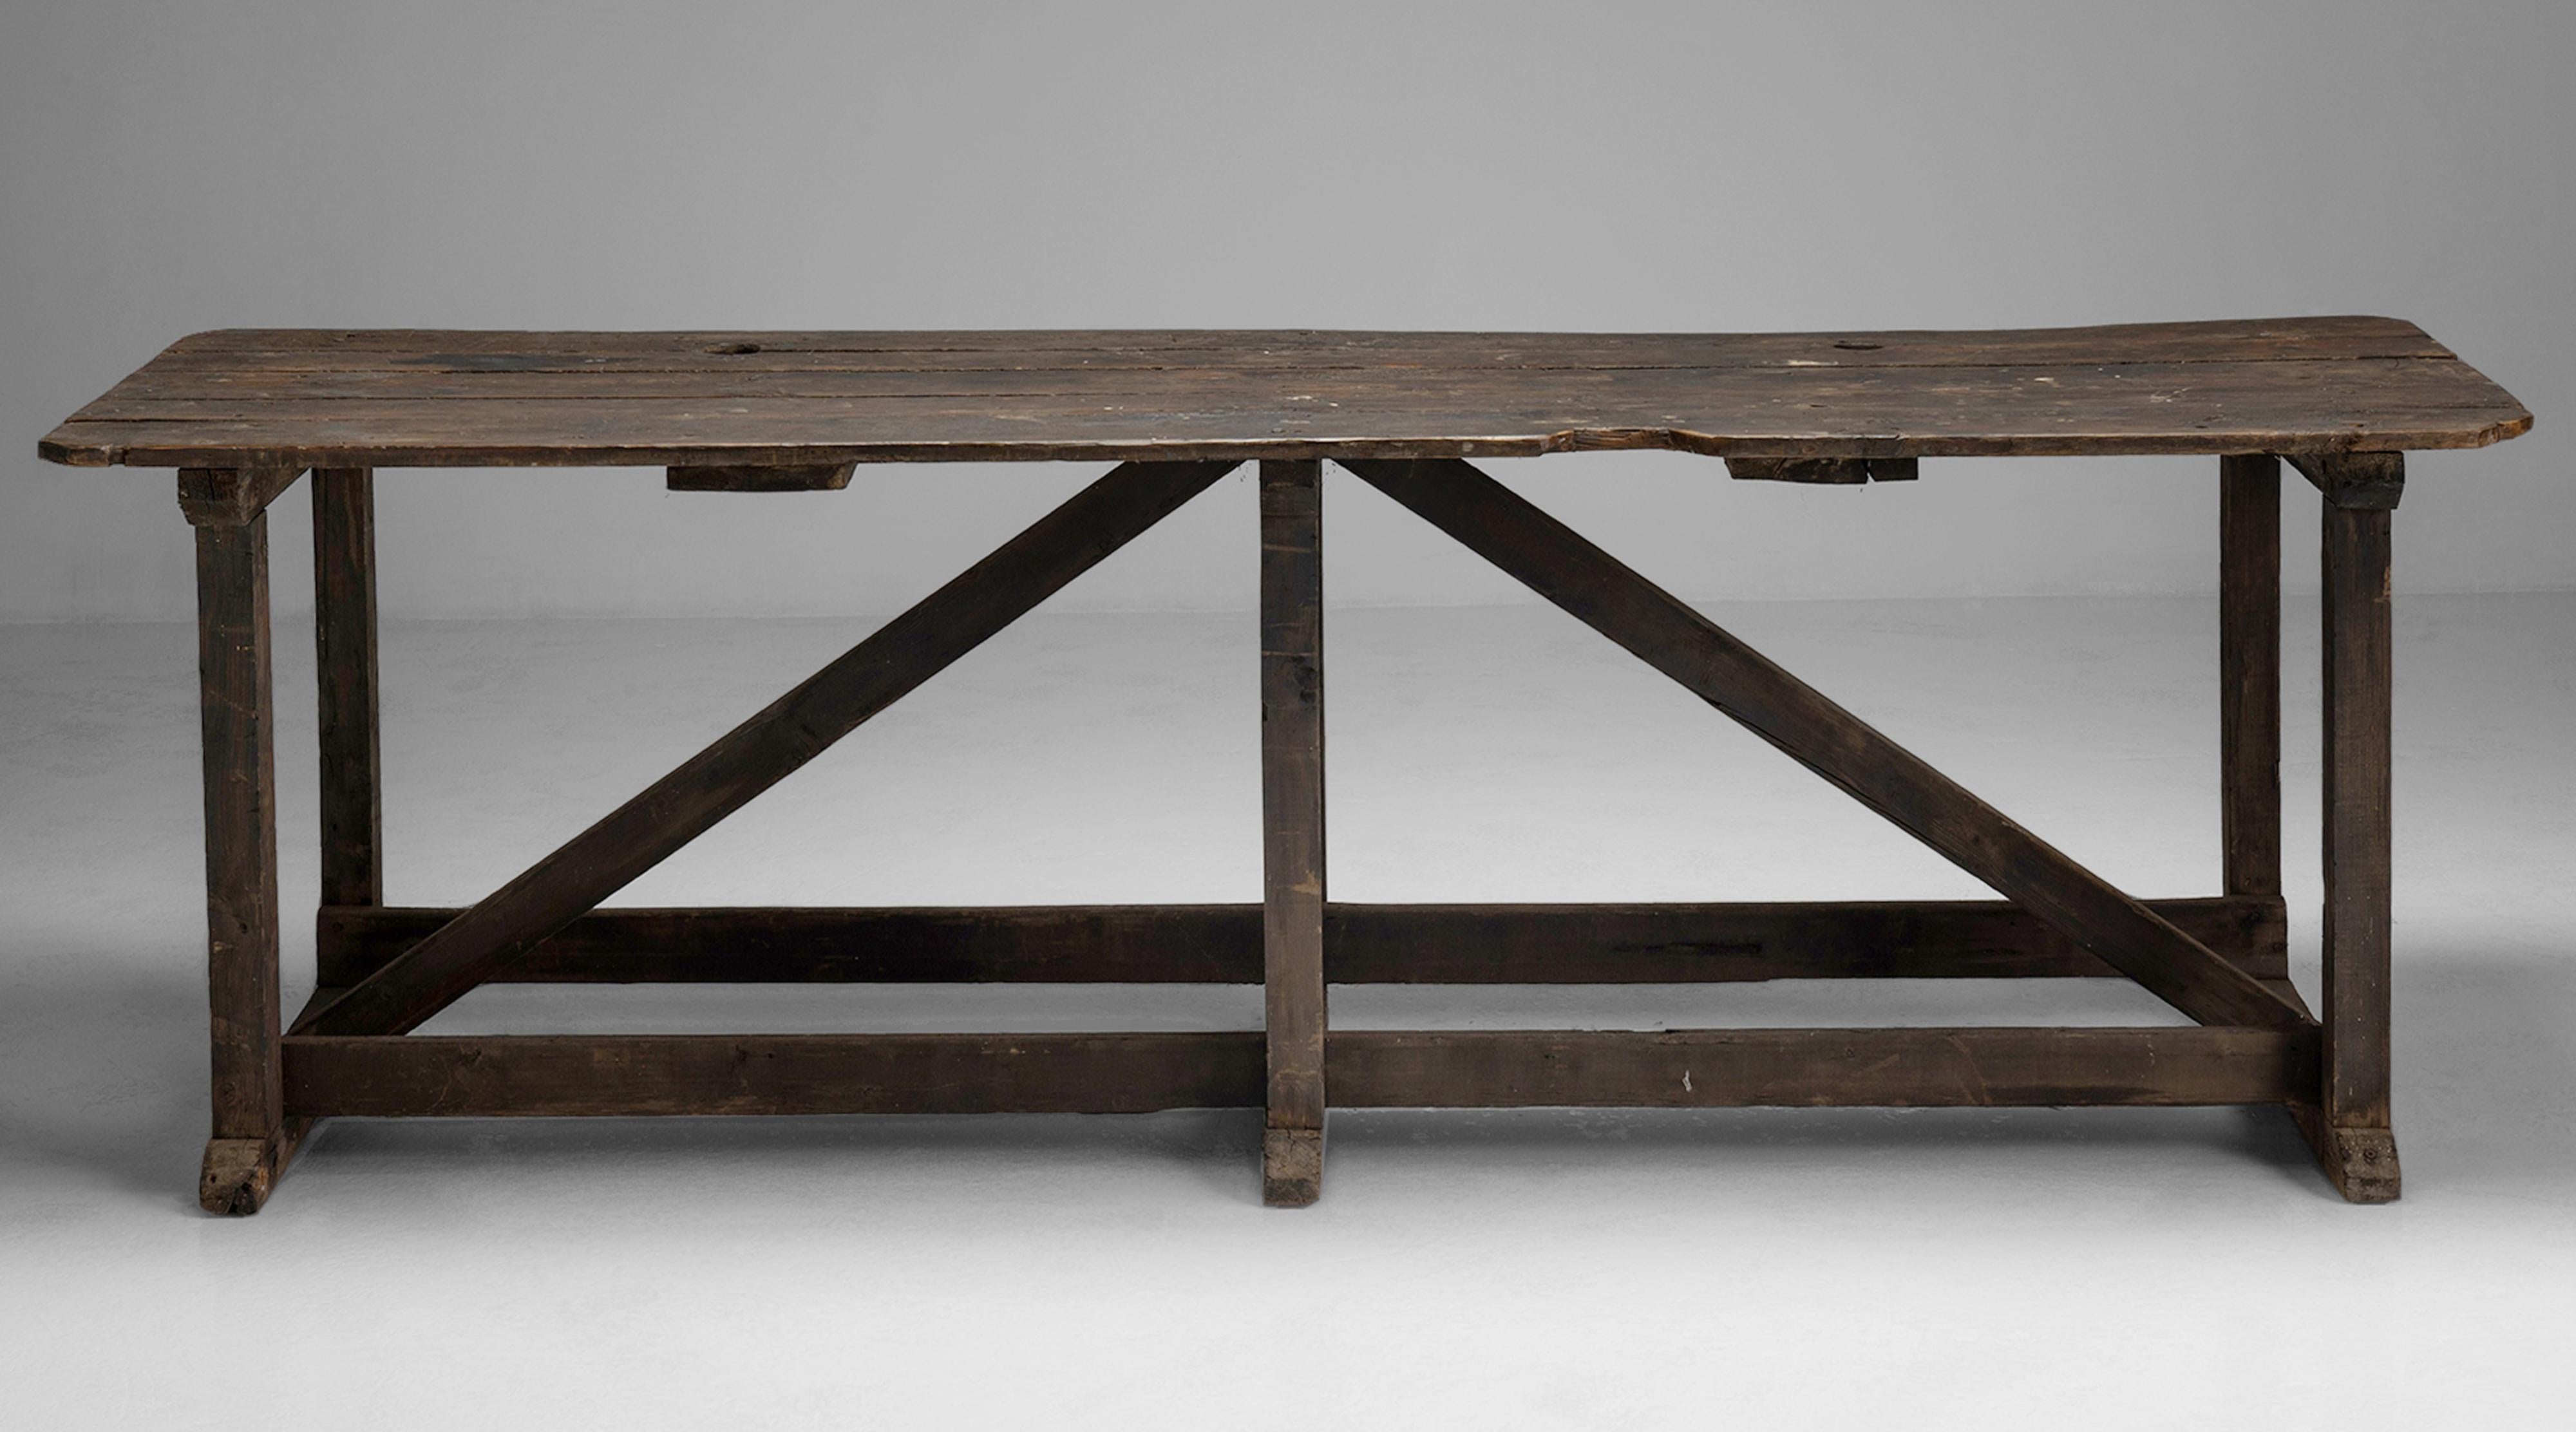 Pine Worktable, England circa 1900.

Pine table with architectural form, originally made for a Mill in the Midlands.